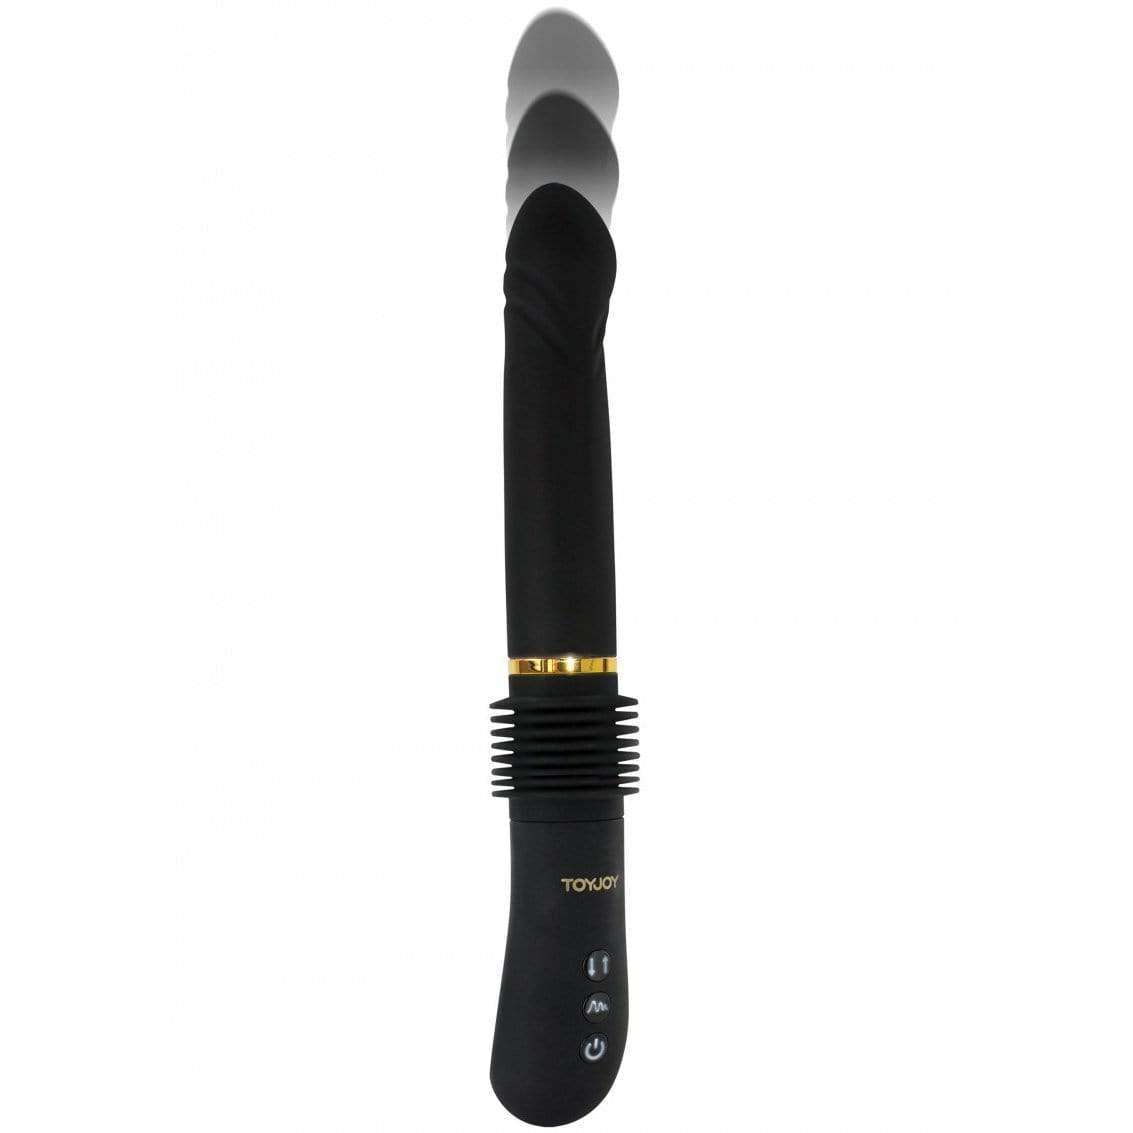 ToyJoy - Magnum Opus I Thrust in You Thruster Vibrator  (Black) Realistic Dildo w/o suction cup (Vibration) Rechargeable 8713221495235 CherryAffairs